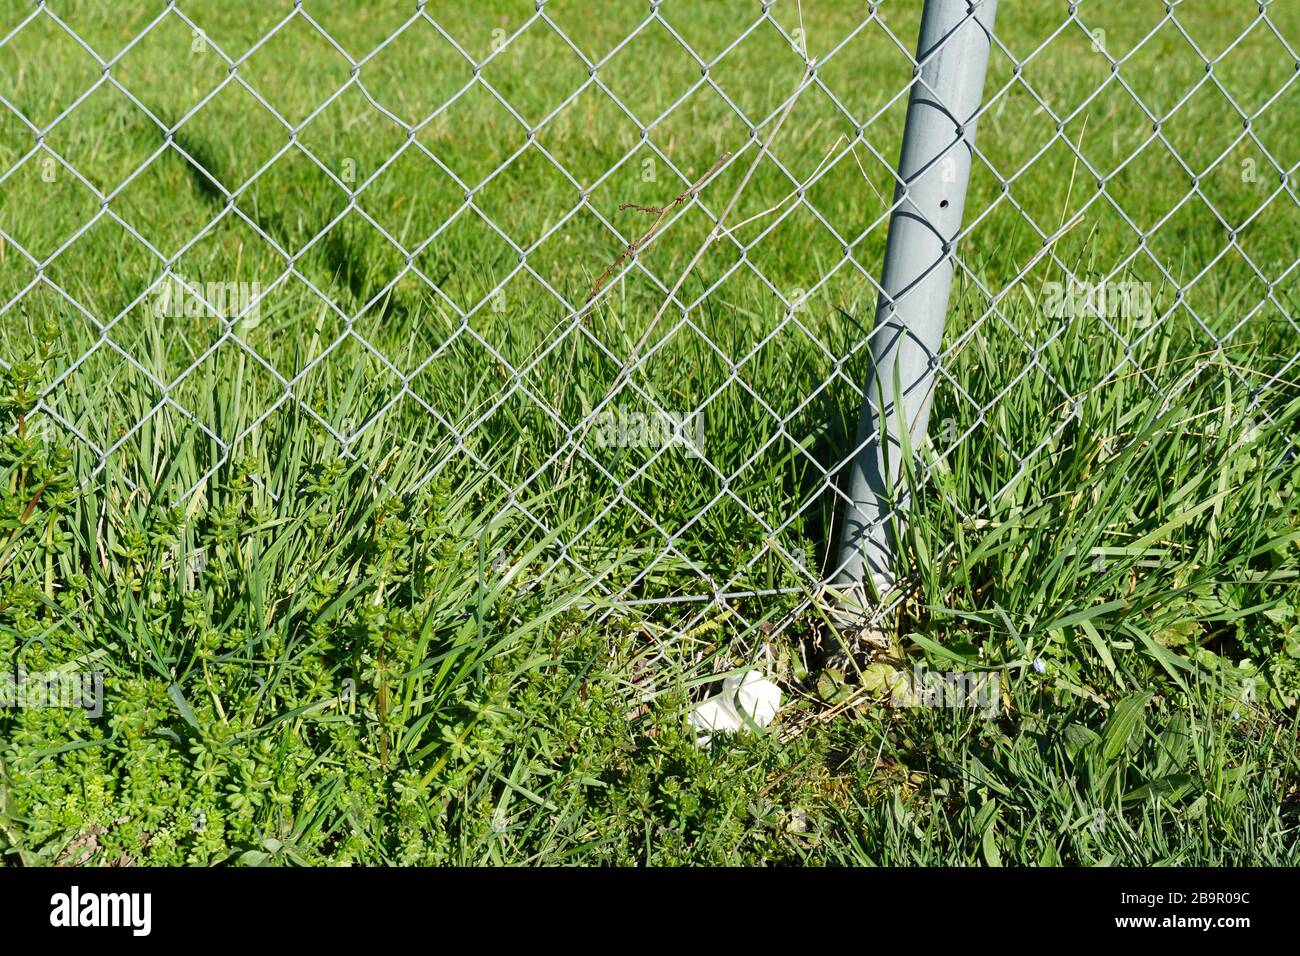 Spreading of coronavirus COVID-19 - used paper tissue in the wire fence. A potential danger or risk for public health, paper tissue dropped. Stock Photo